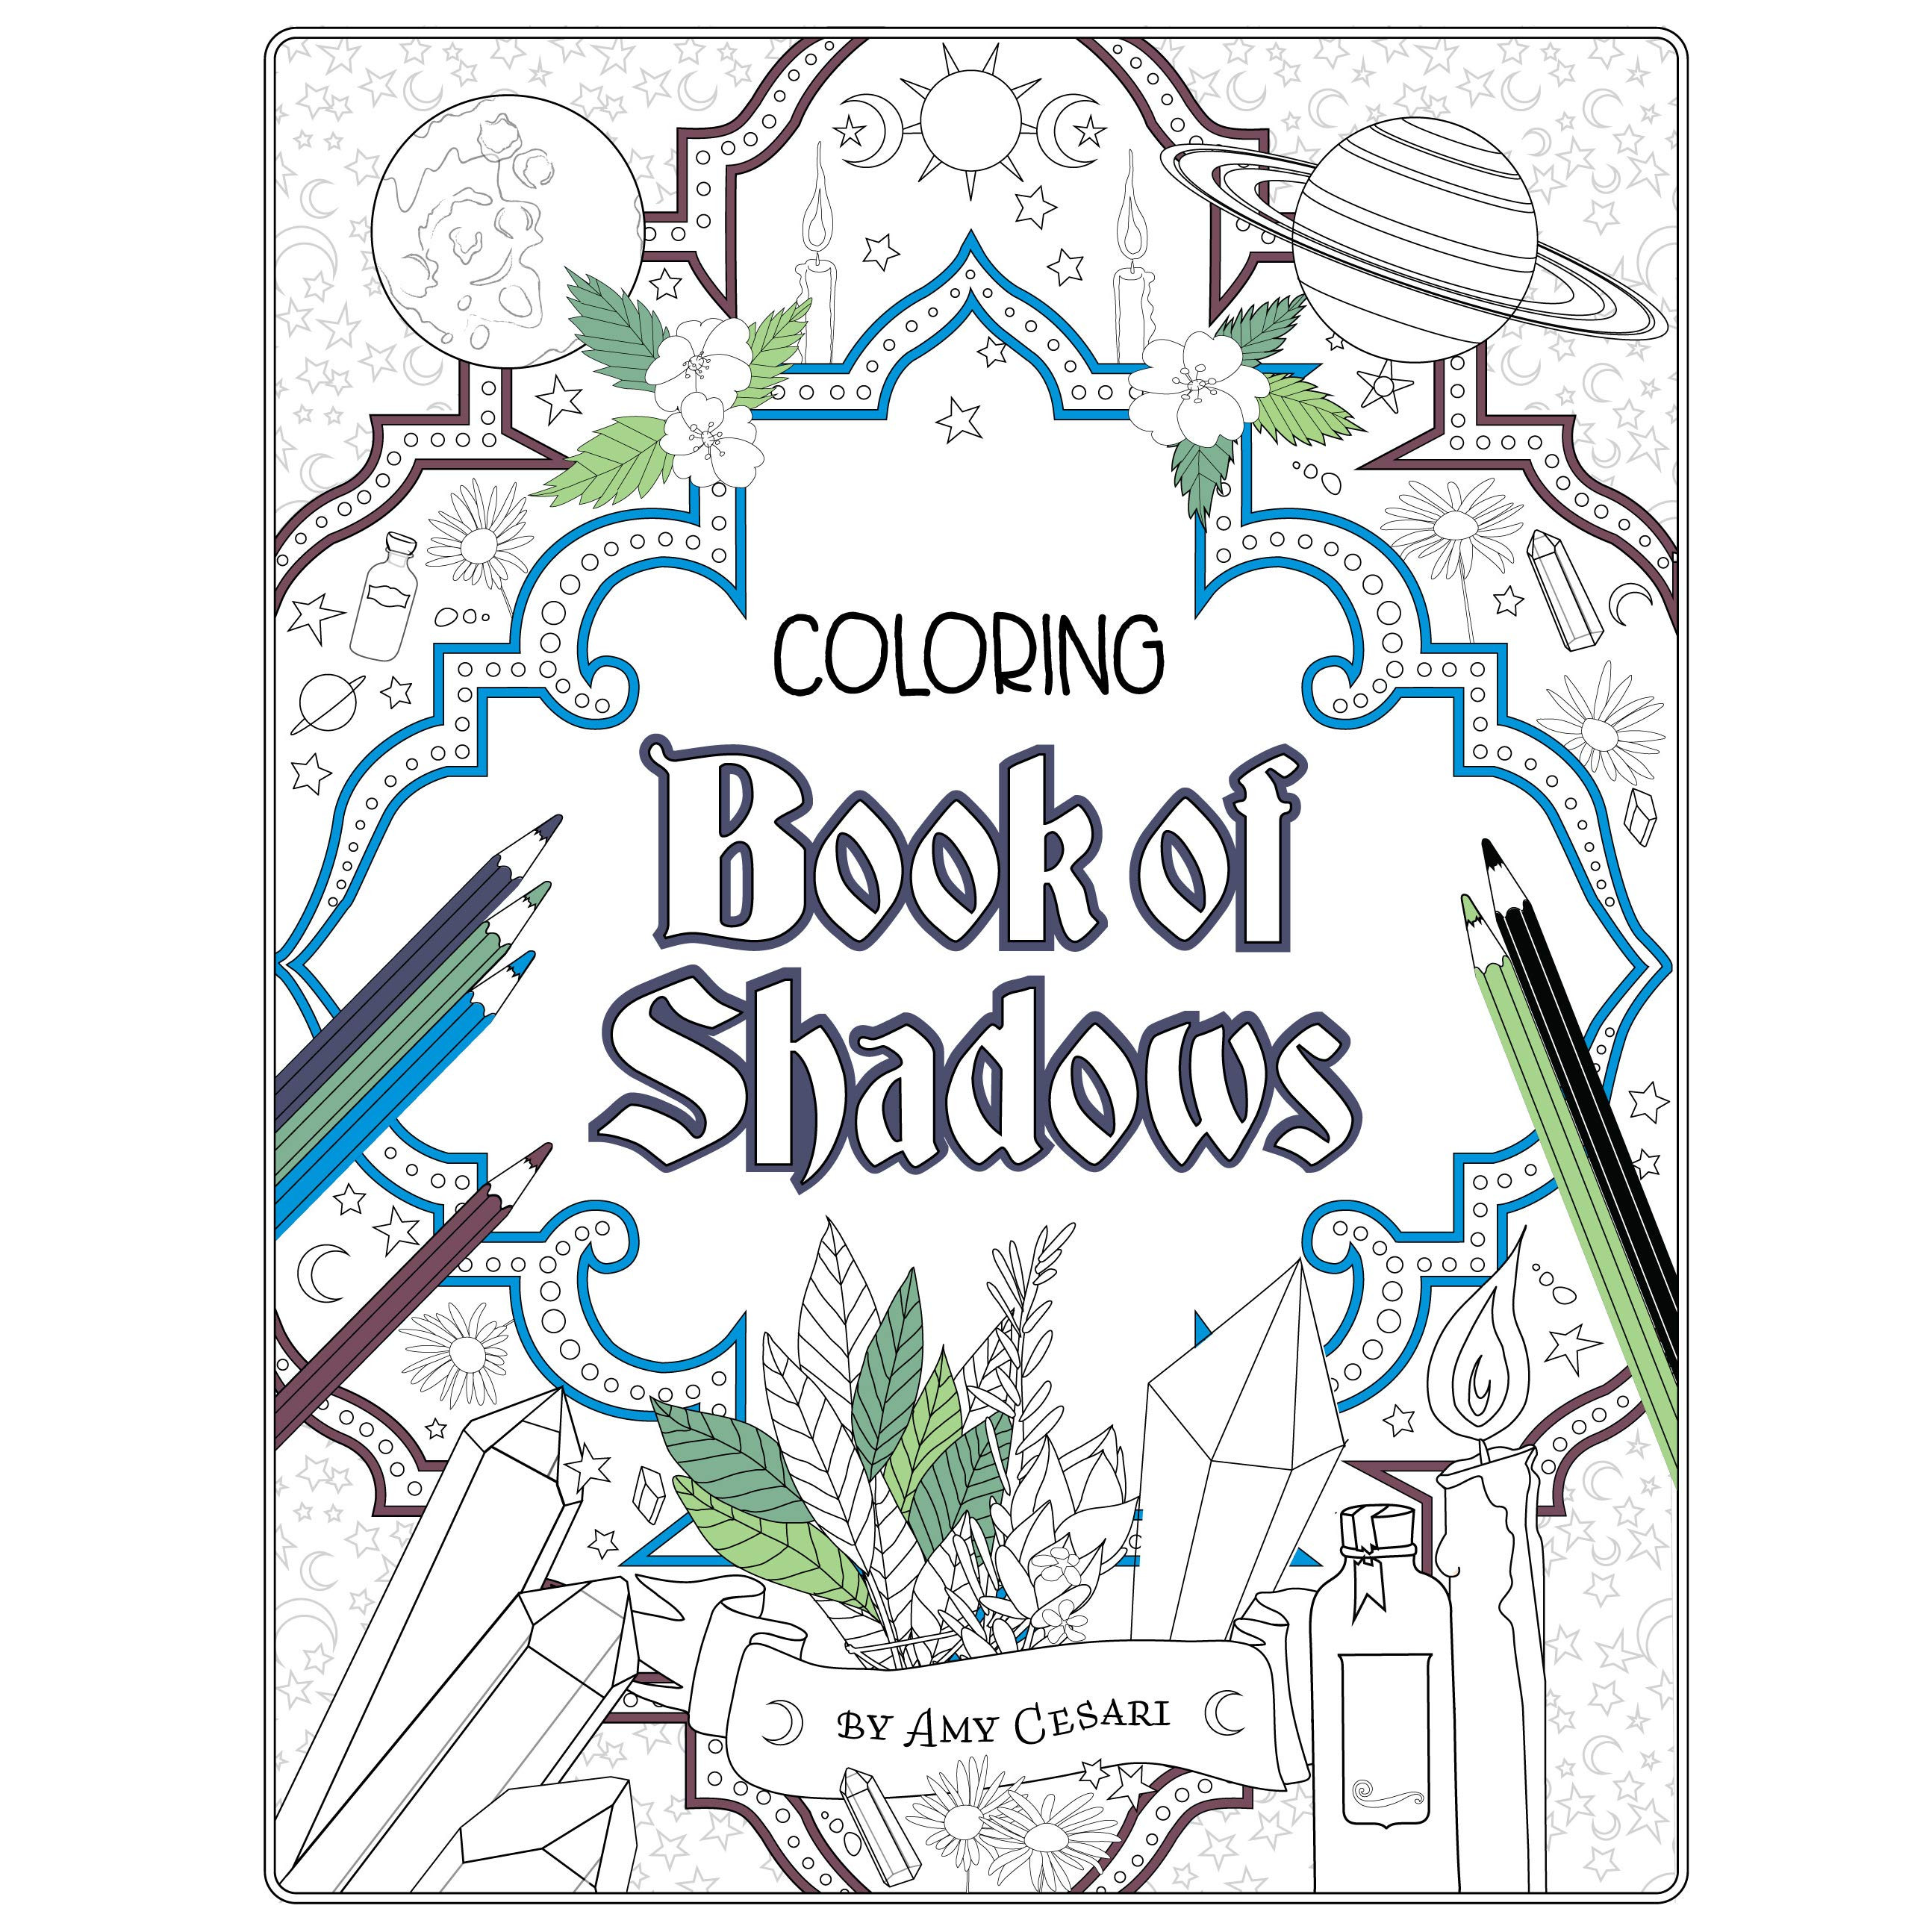 Coloring Book Of Shadows
 Book giveaway for Coloring Book of Shadows by Amy Cesari